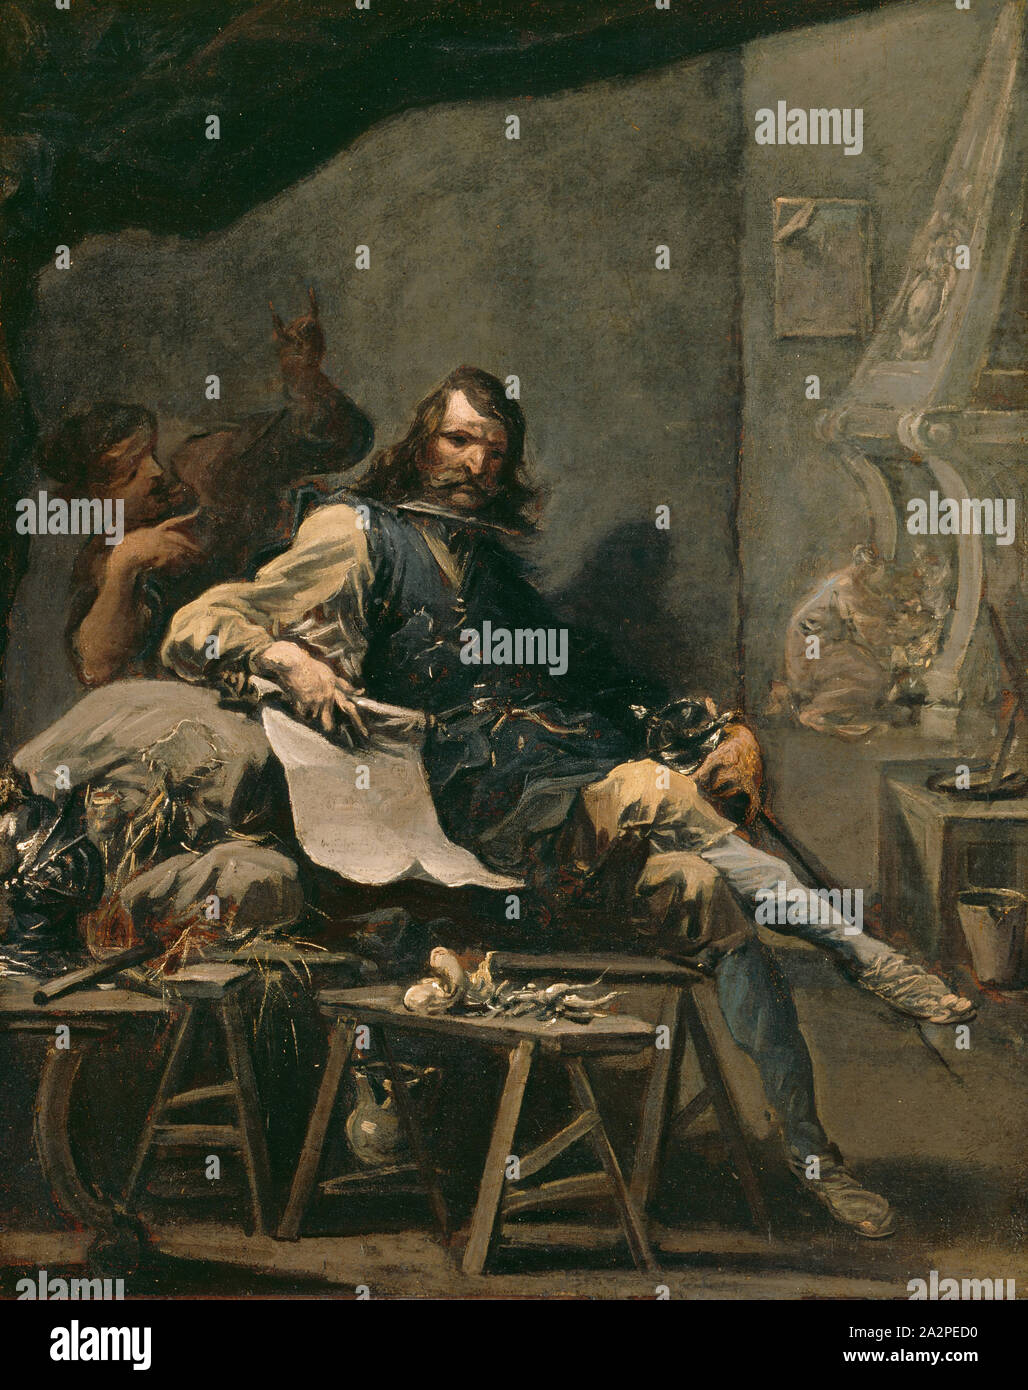 Alessandro Magnasco, Italian, 1667-1749, Satire on a Nobleman in Misery, between 1719 and 1725, oil on canvas, Framed: 34 7/8 × 29 3/16 × 2 1/4 inches (88.6 × 74.1 × 5.7 cm Stock Photo